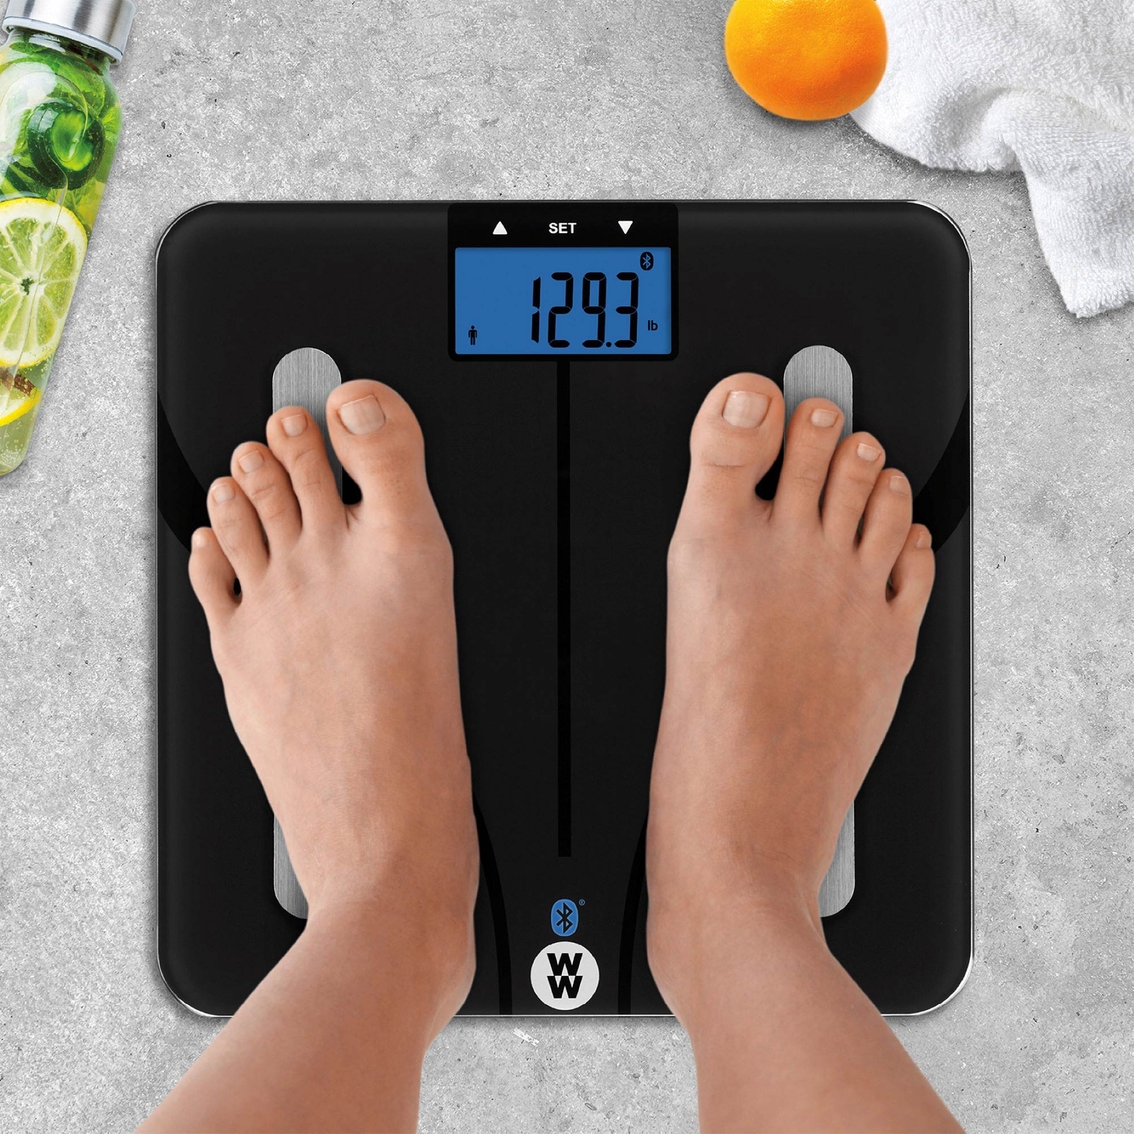 WW Scales by Conair Digital Bluetooth Body Analysis Scale - Image 4 of 5